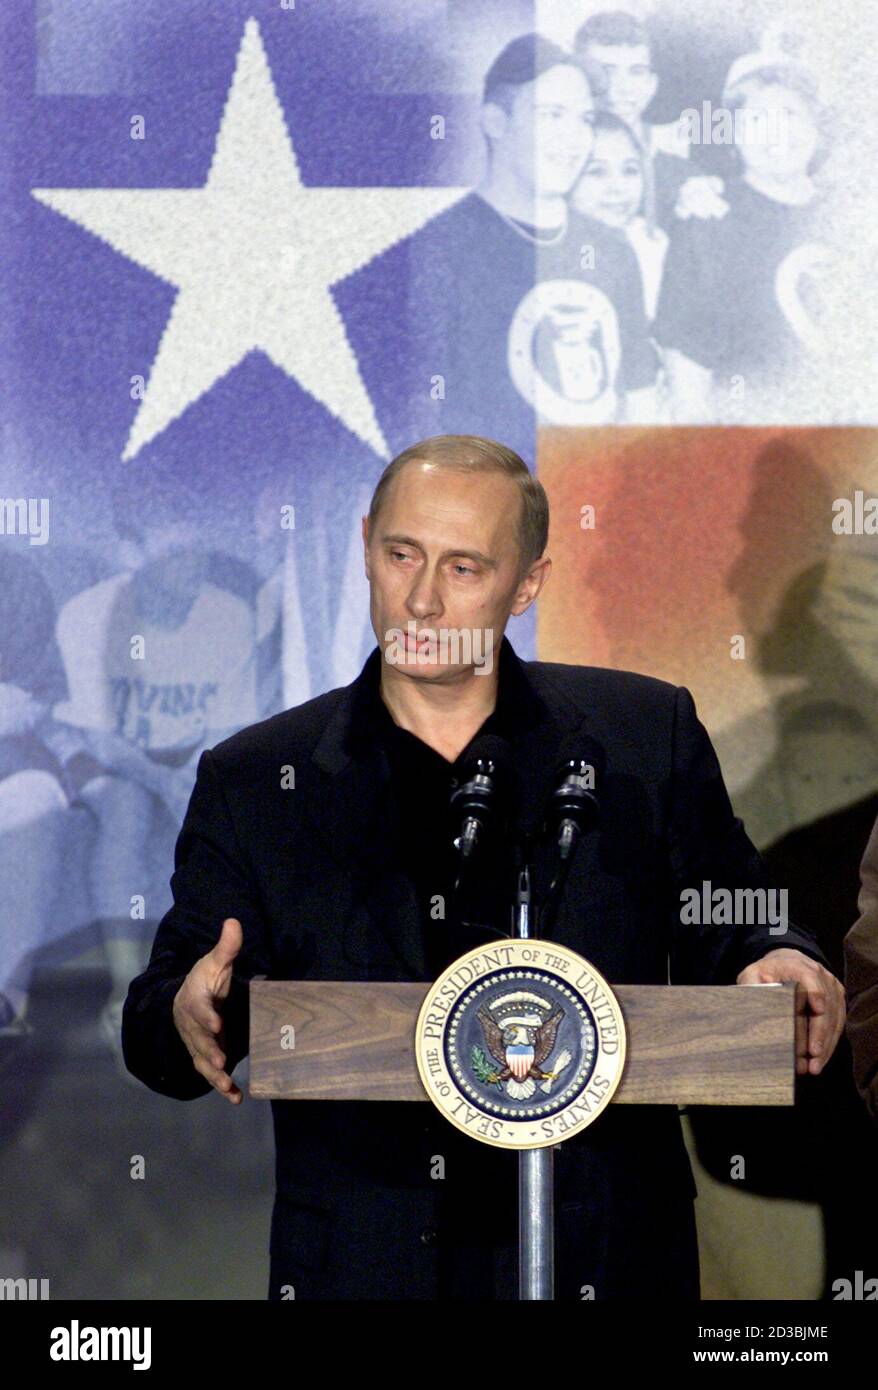 Russian President Vladimir Putin makes remarks at the Crawford High School in Crawford, Texas, November 15, 2001. Putin, who opposes U.S. President George W. Bush's intention to abandon the 1972 Anti-Ballistic Missile treaty and deploy a shield against incoming missiles from 'rogue' states, said the summit had not been a waste of time and the two leaders aimed to continue talks on the issue. REUTERS/Jeff Mitchell  JM/SV Stock Photo